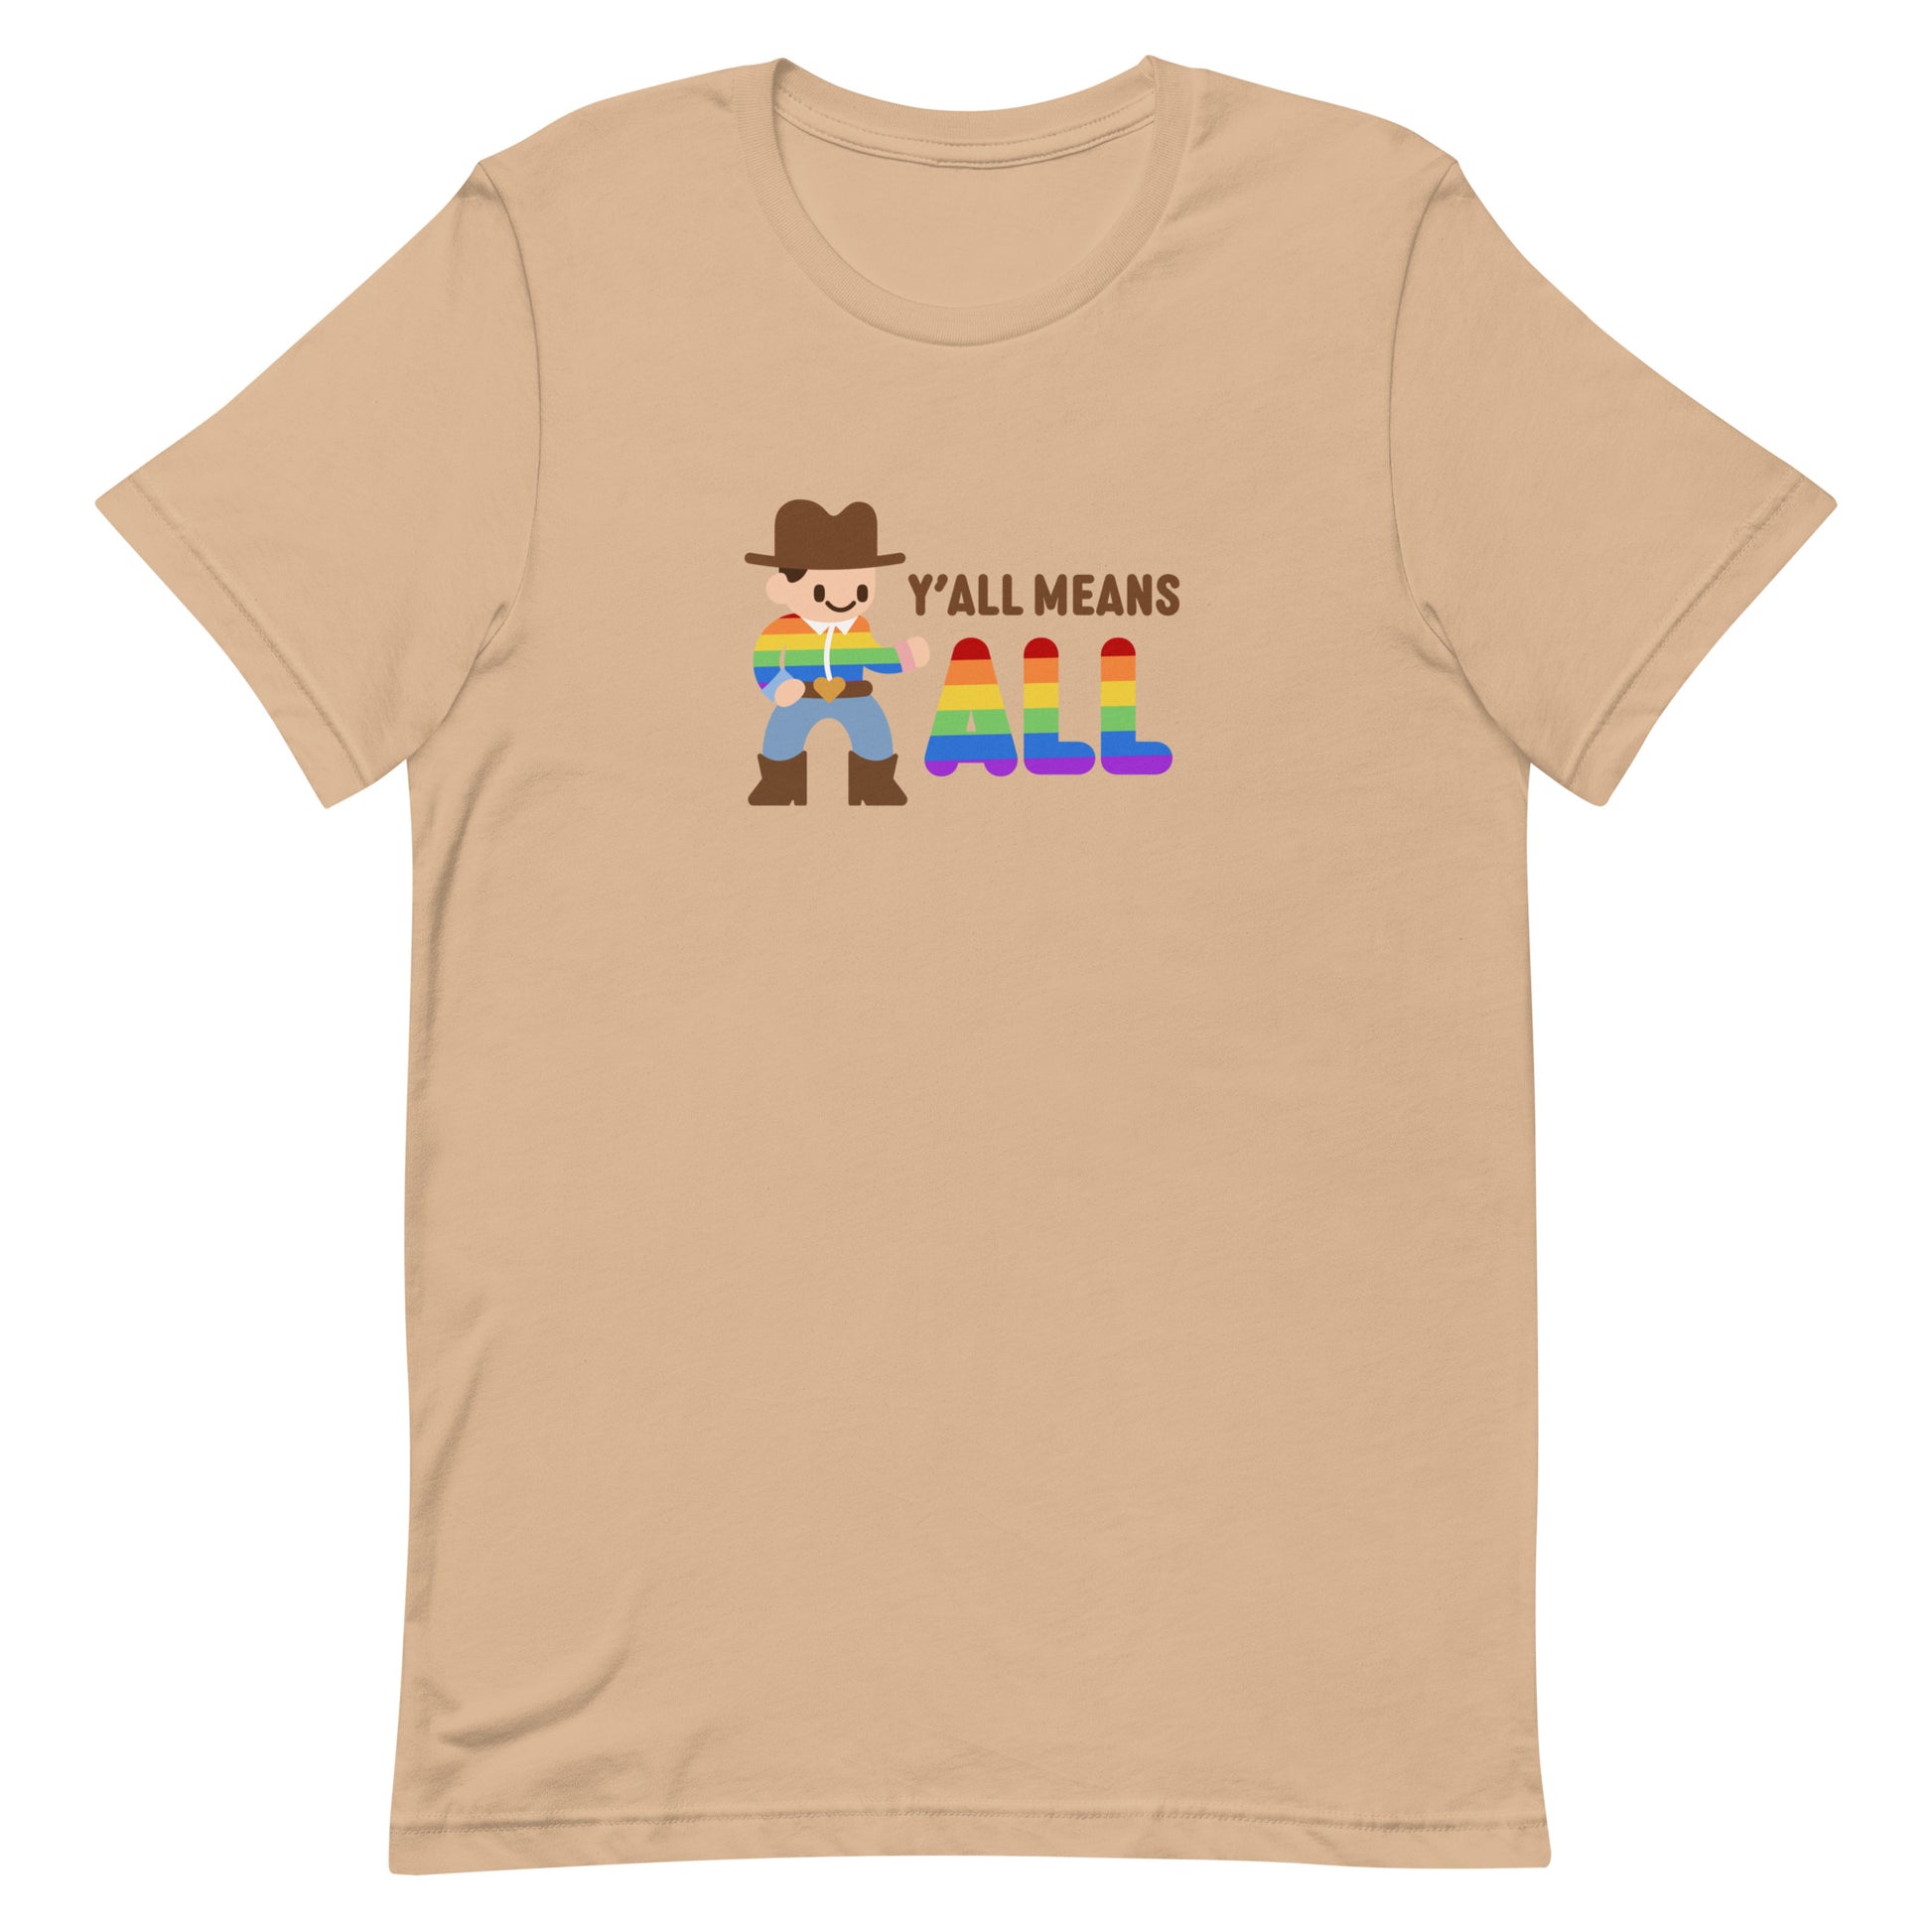 A tan crewneck t-shirt featuring an illustration of a smiling cowboy wearing a rainbow striped shirt. Text alongside the cowboy reads "Y'all means ALL". The word "ALL" is rainbow-colored to match the cowboy's shirt.